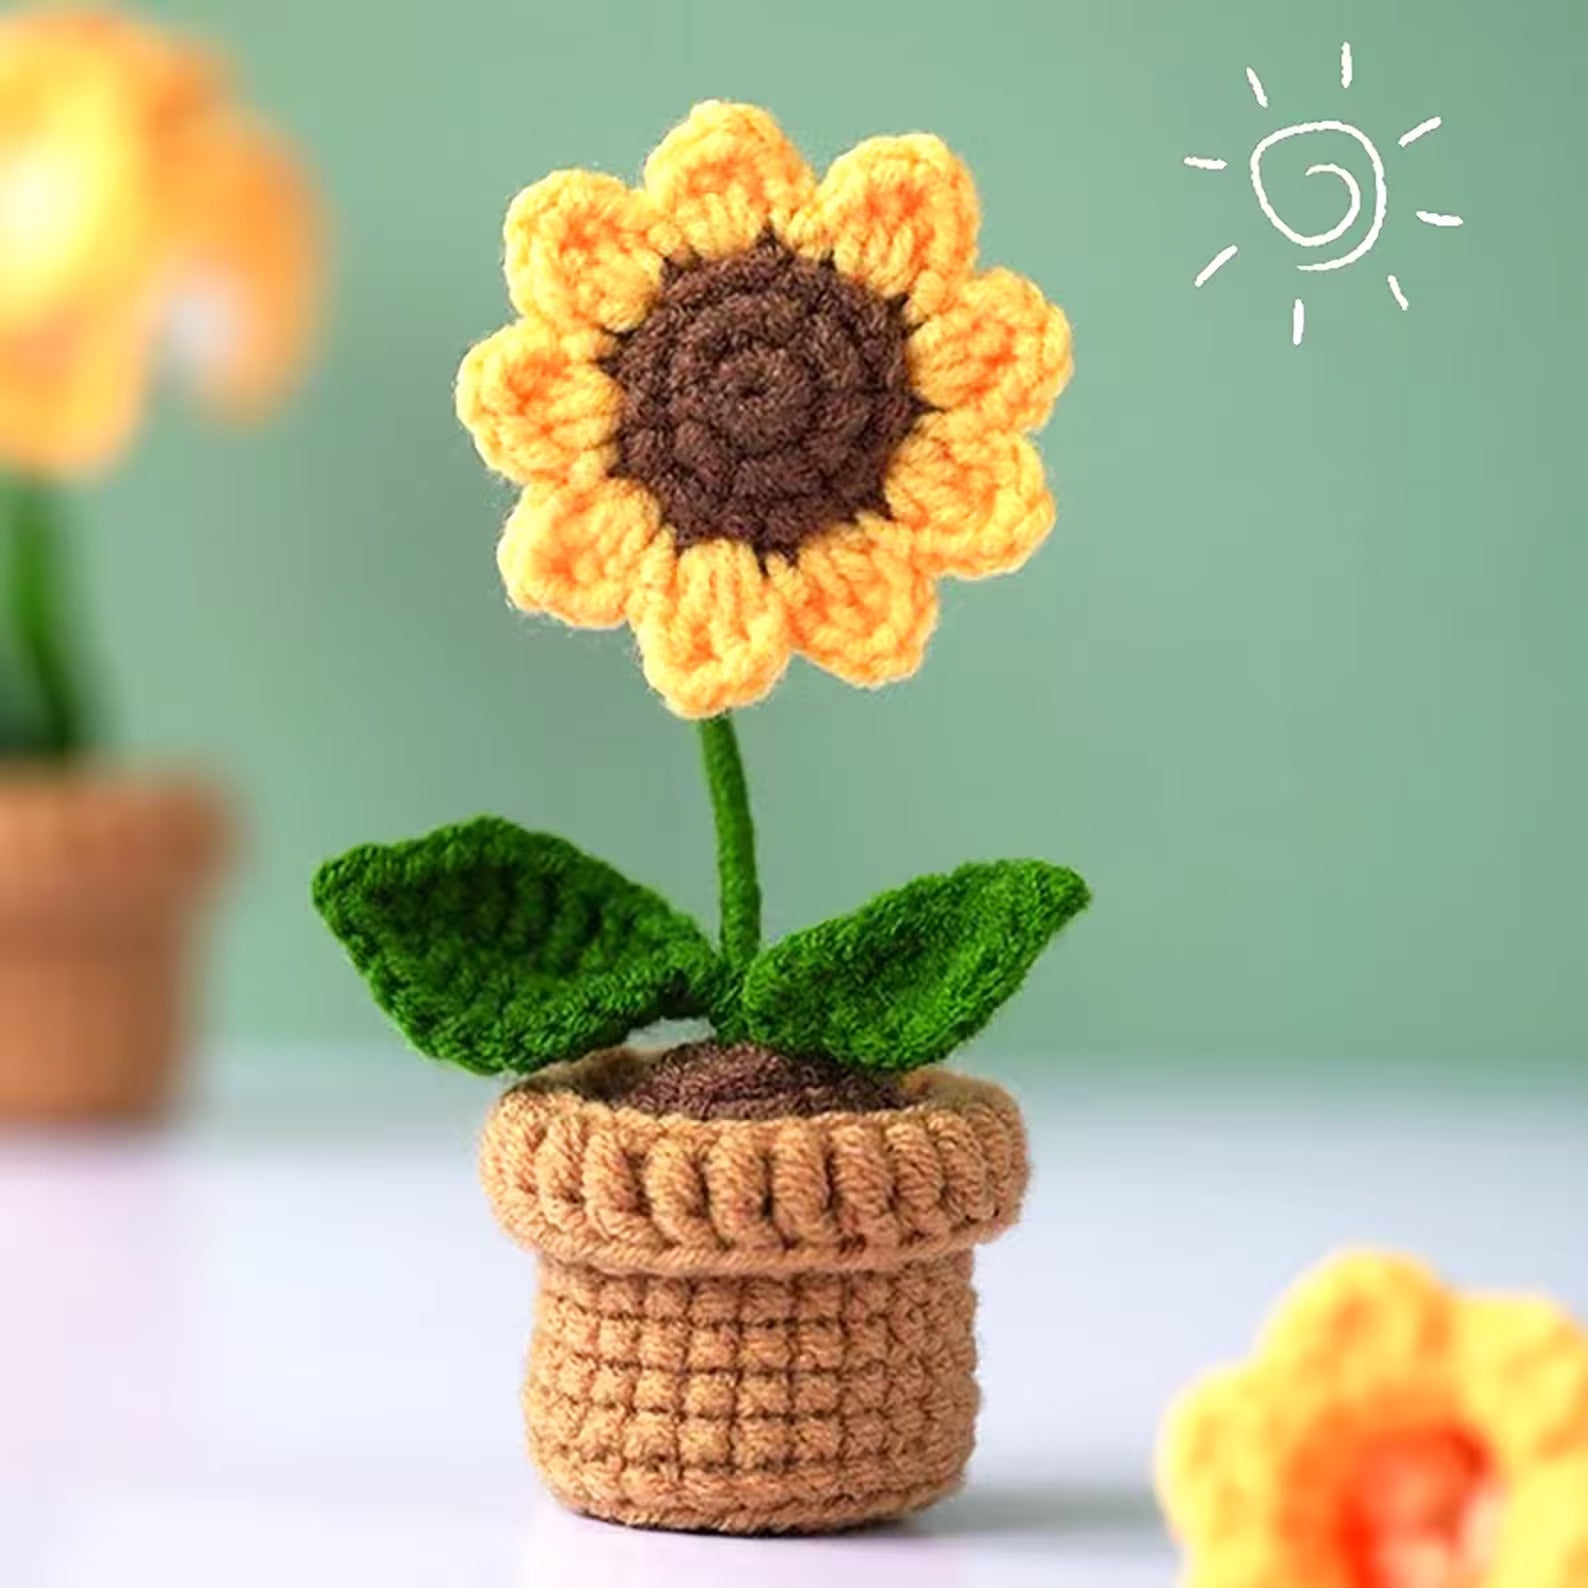 crocheted potted plants